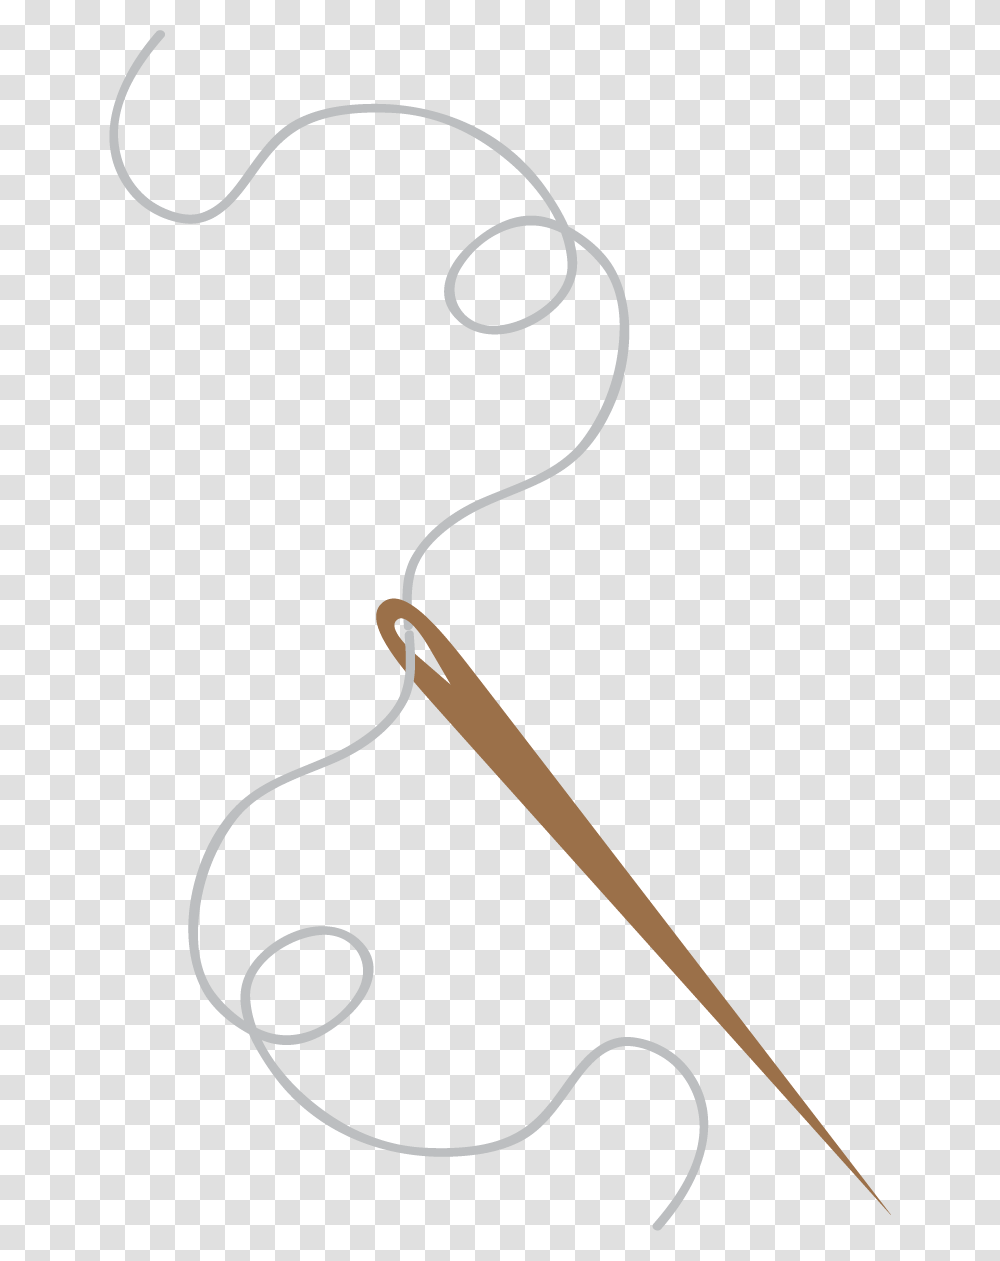 Clip Art Sewing Embroidery Transprent Sewing Needle, Bow, Whip, Adapter, Coil Transparent Png